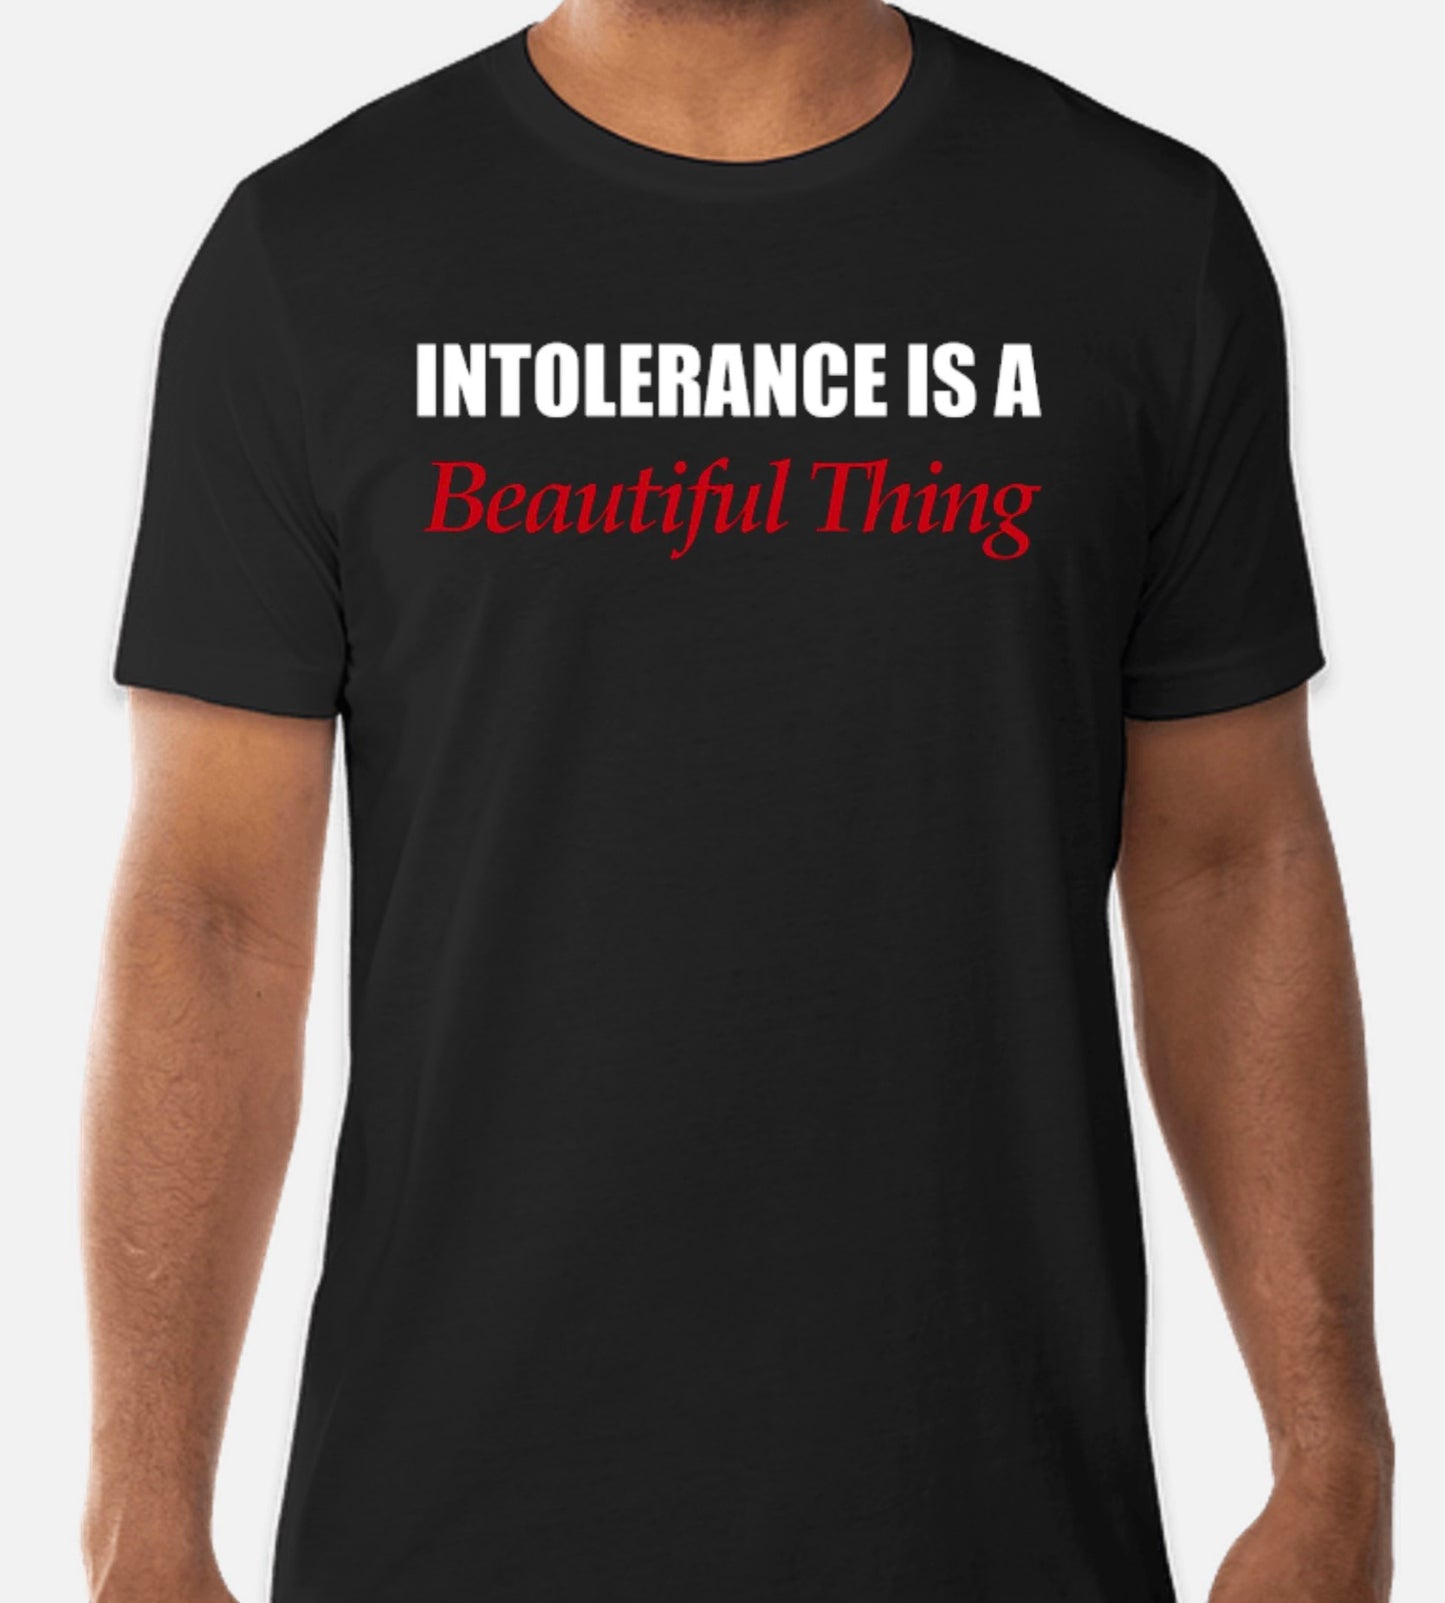 "Intolerance is a Beautiful Thing" Tee